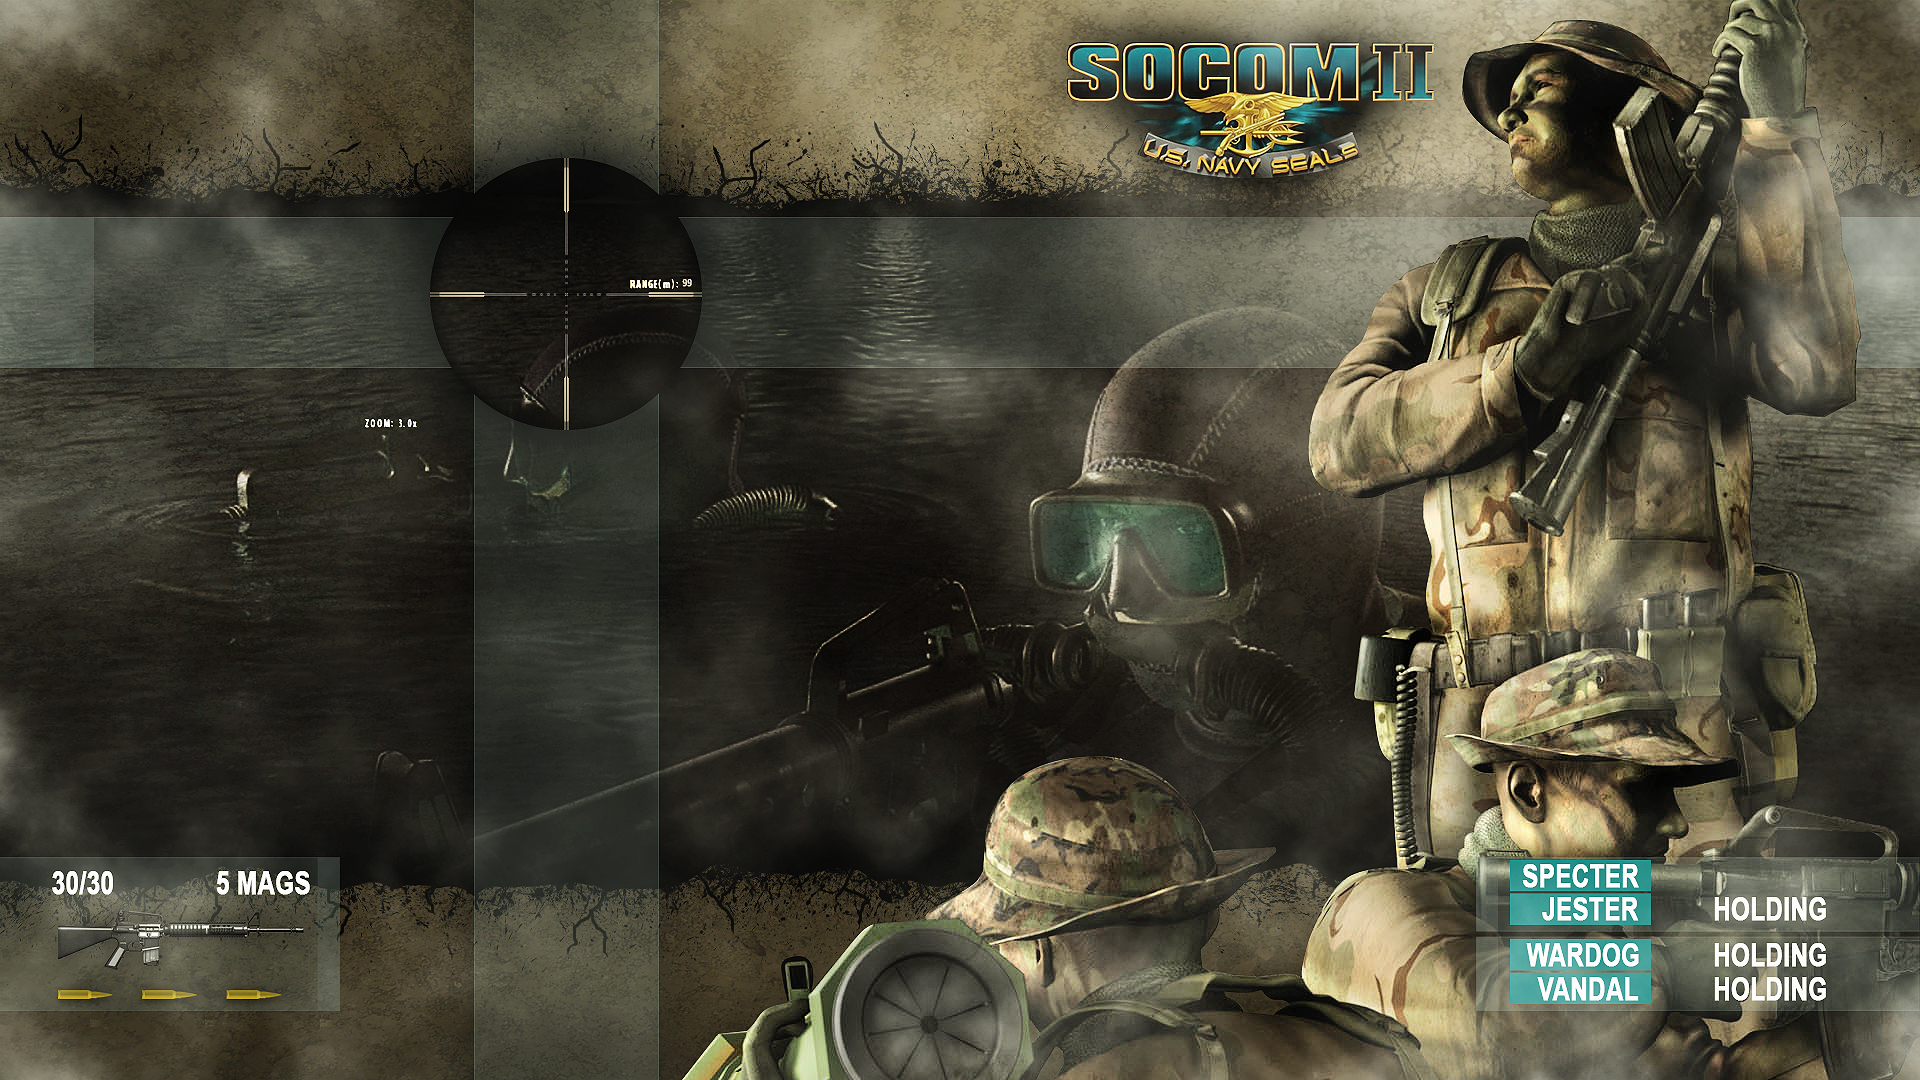 SOCOM 2 Charlie Wallpaper Features Rob Roy and various elements